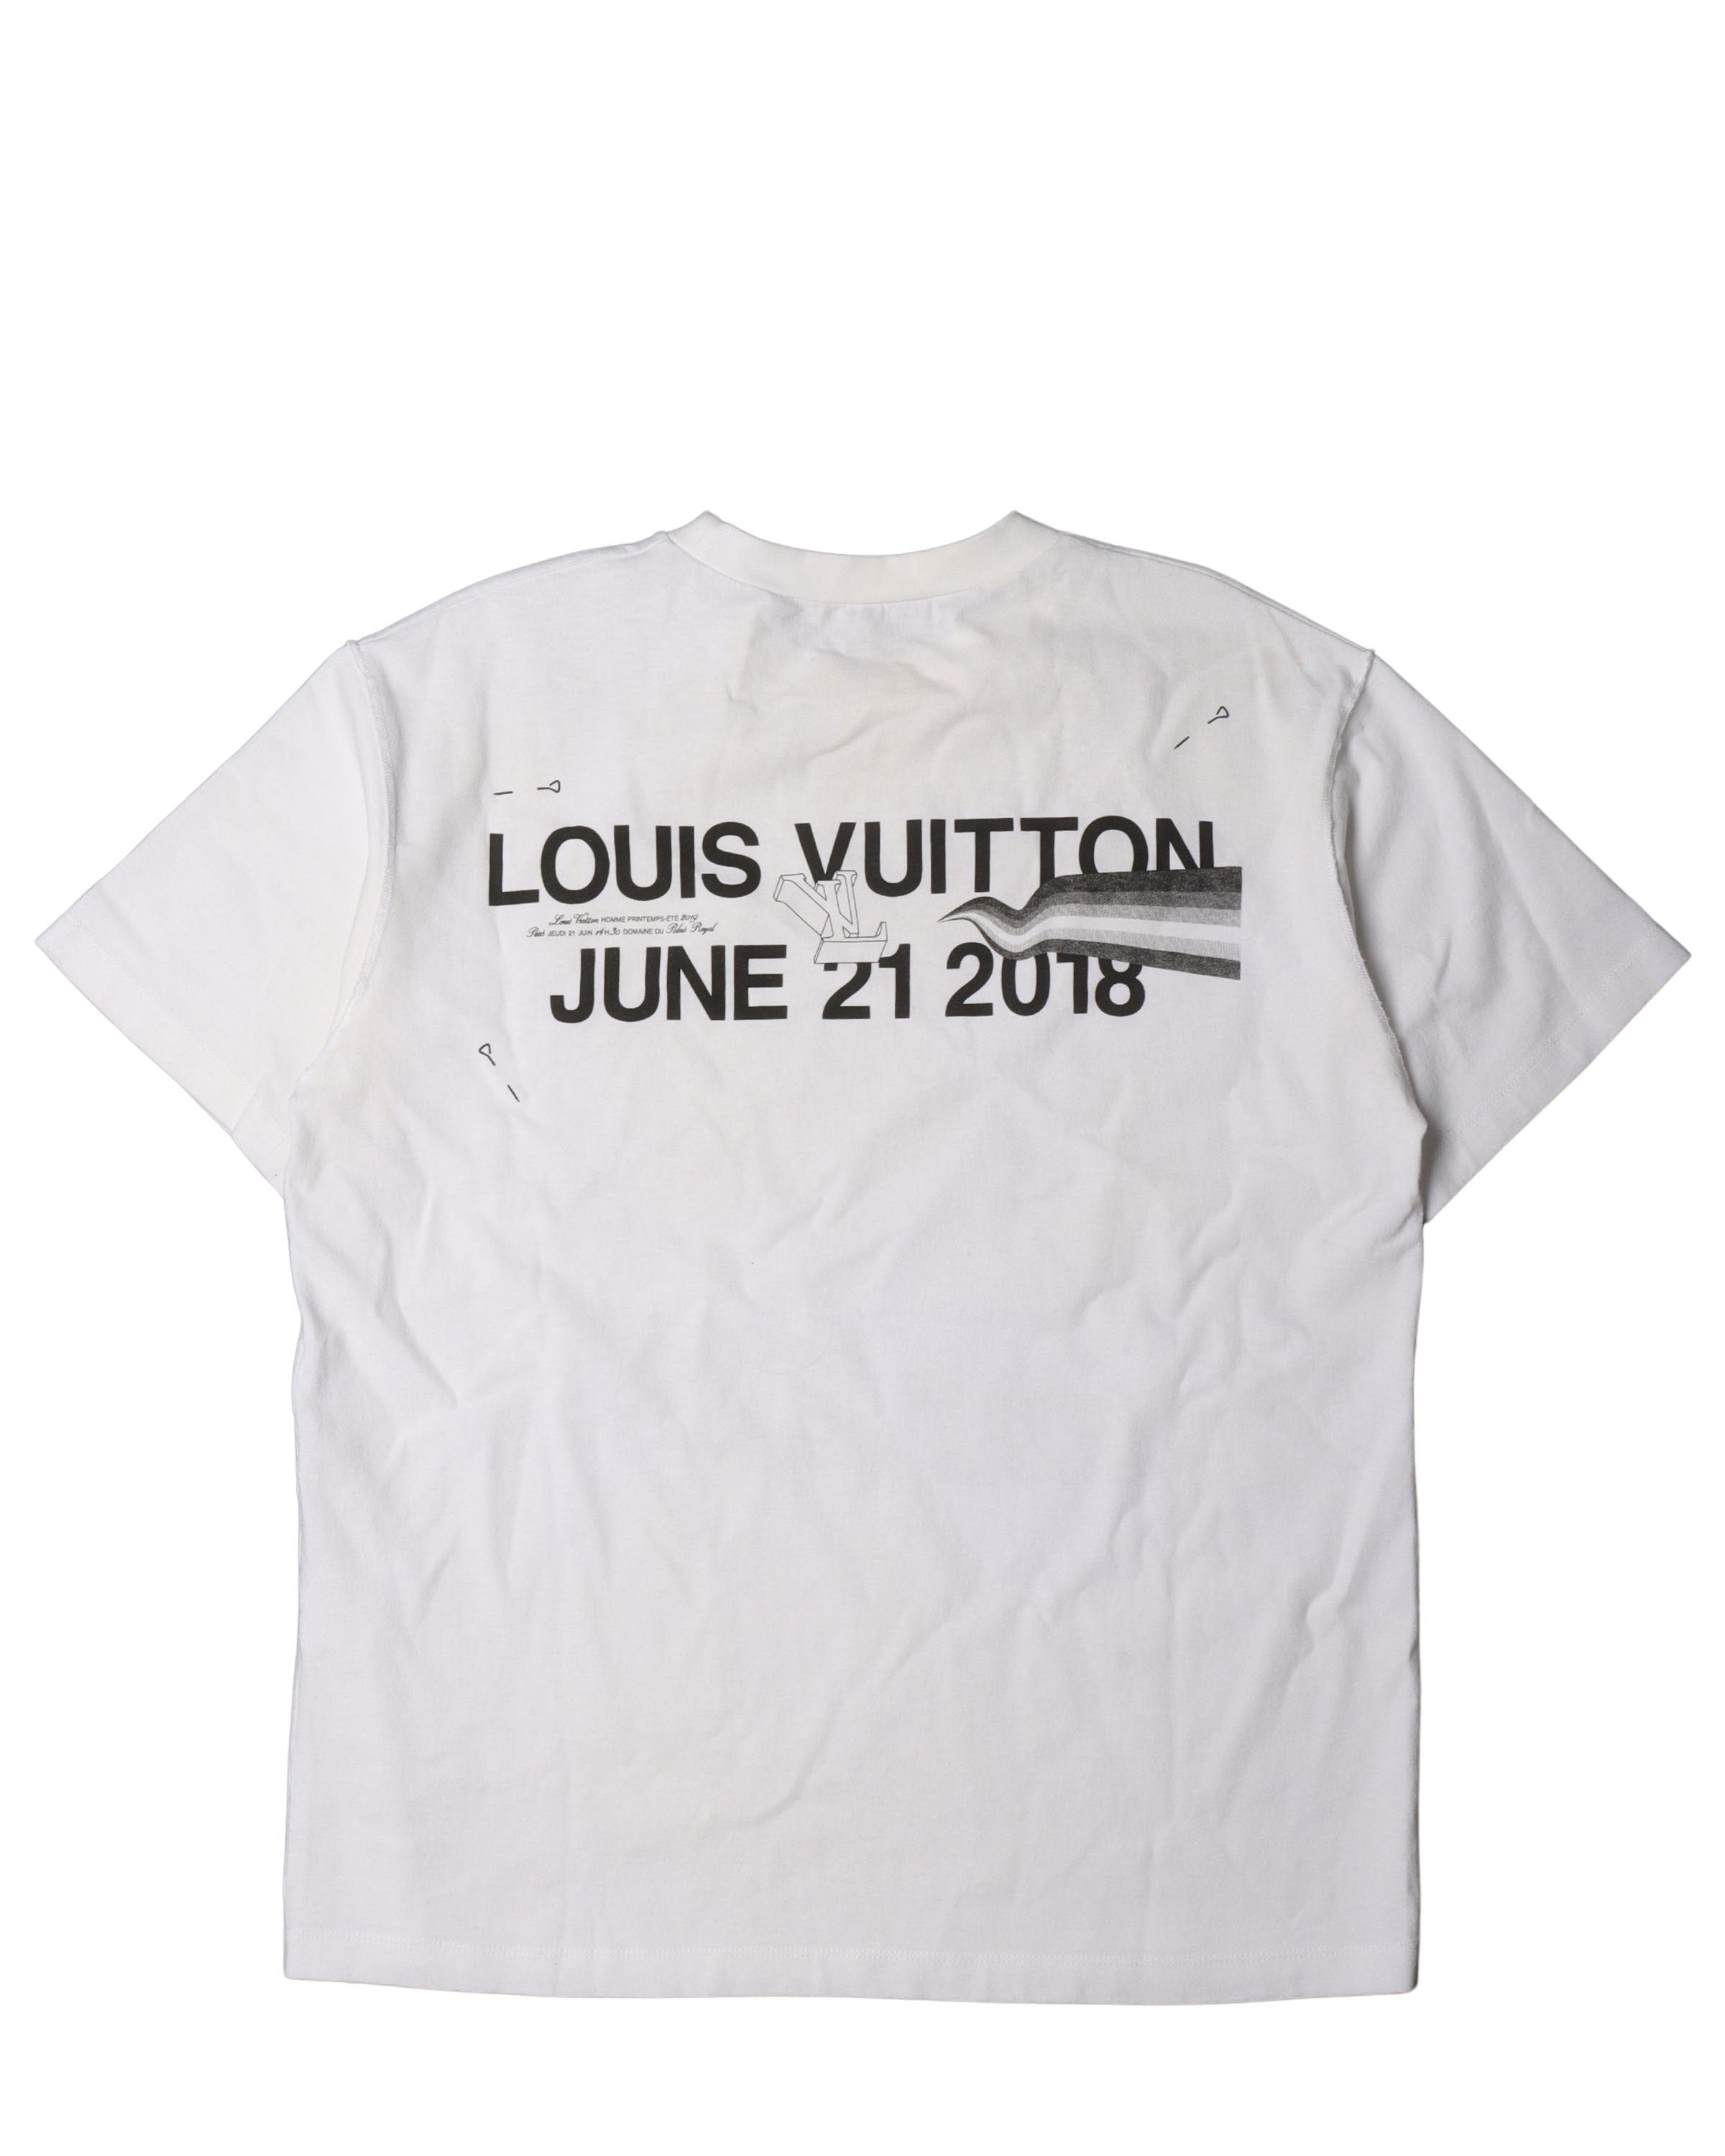 this is not louis vuitton shirt